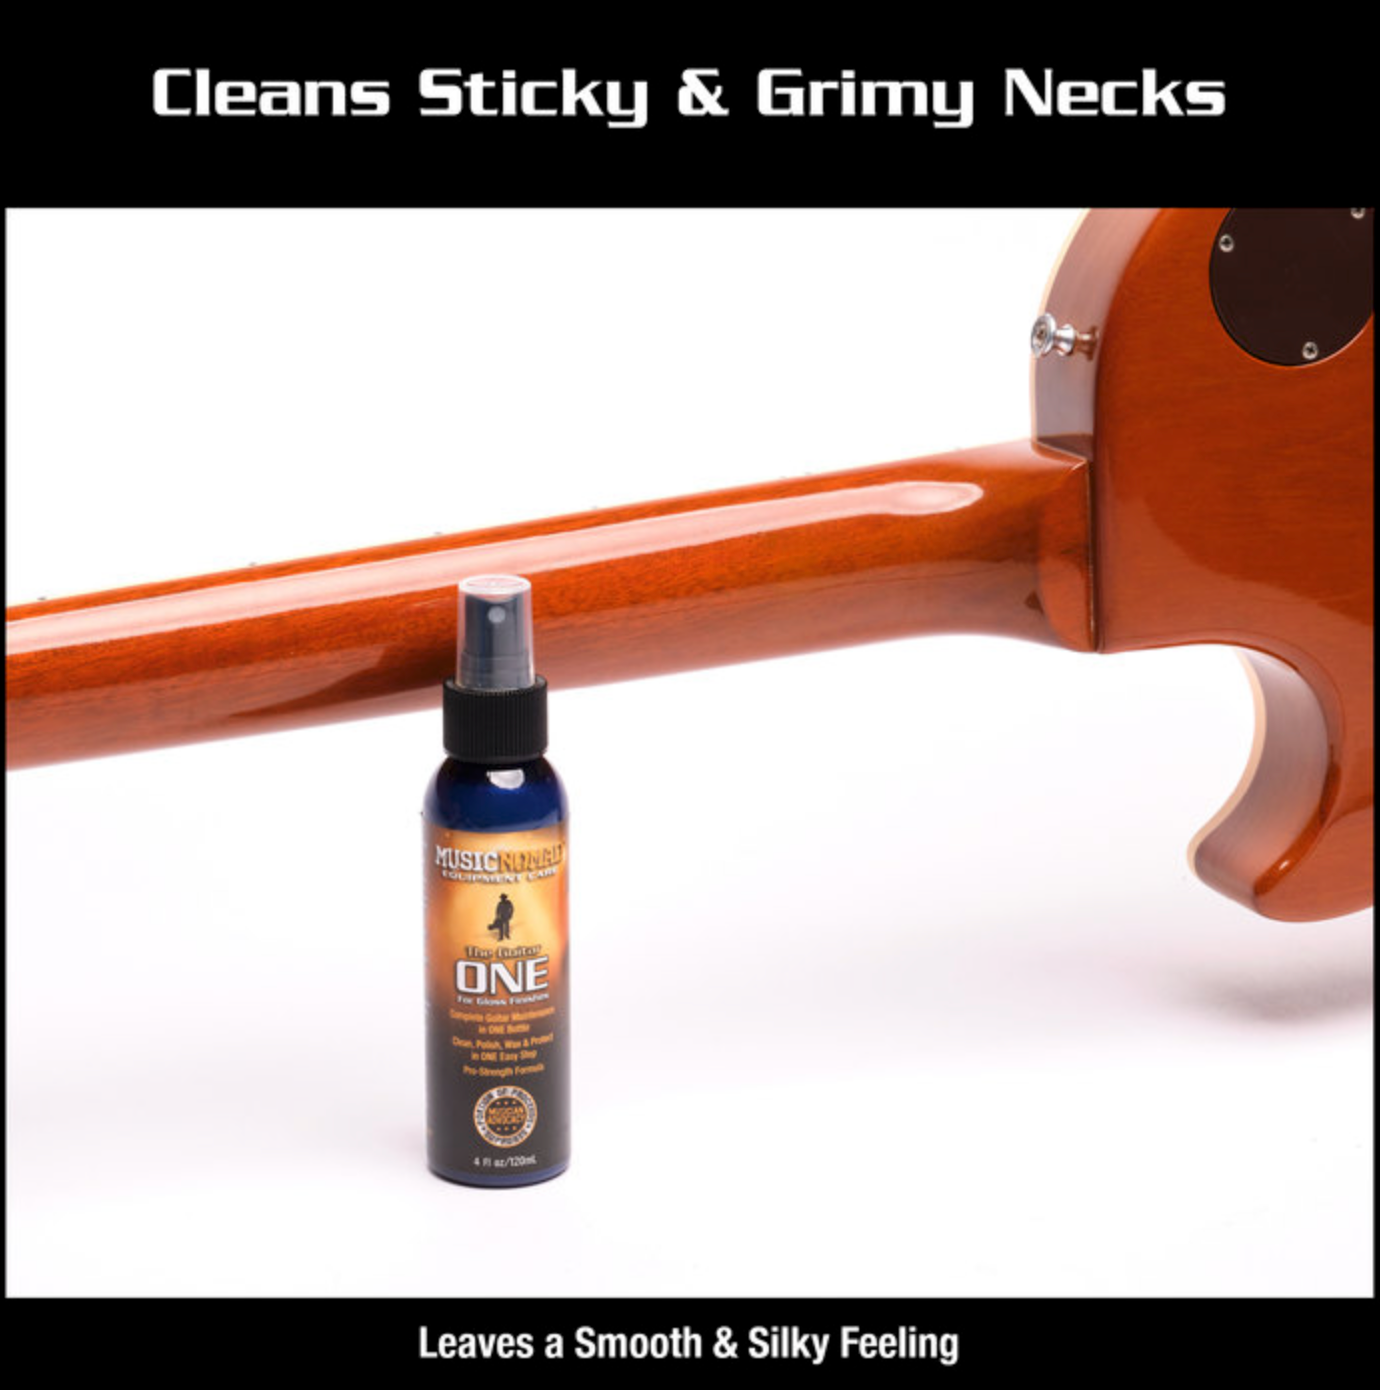 Music Nomad The Guitar One - All in 1 Cleaner, Polish, Wax for Gloss Finishes S/N: MN103